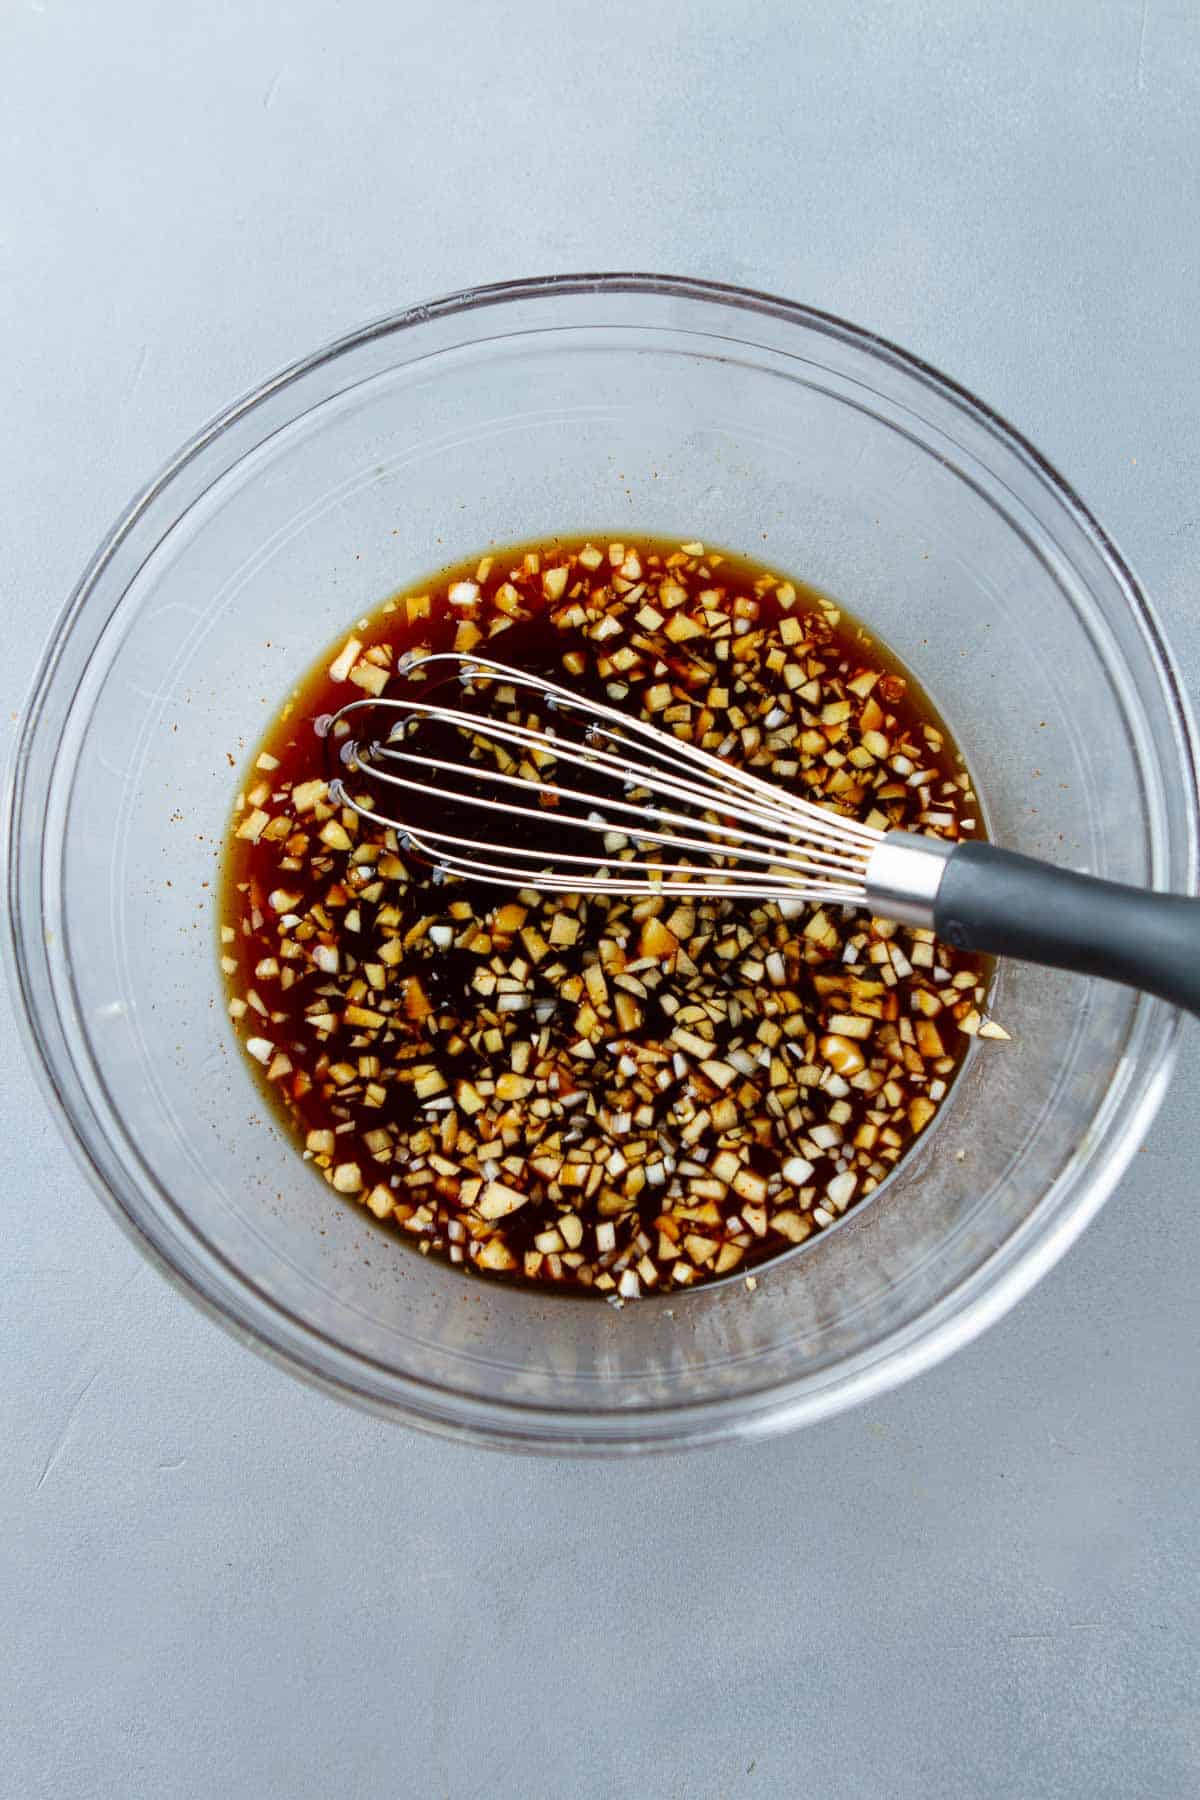 Soy sauce, chopped ginger, garlic and a whisk in a glass bowl.